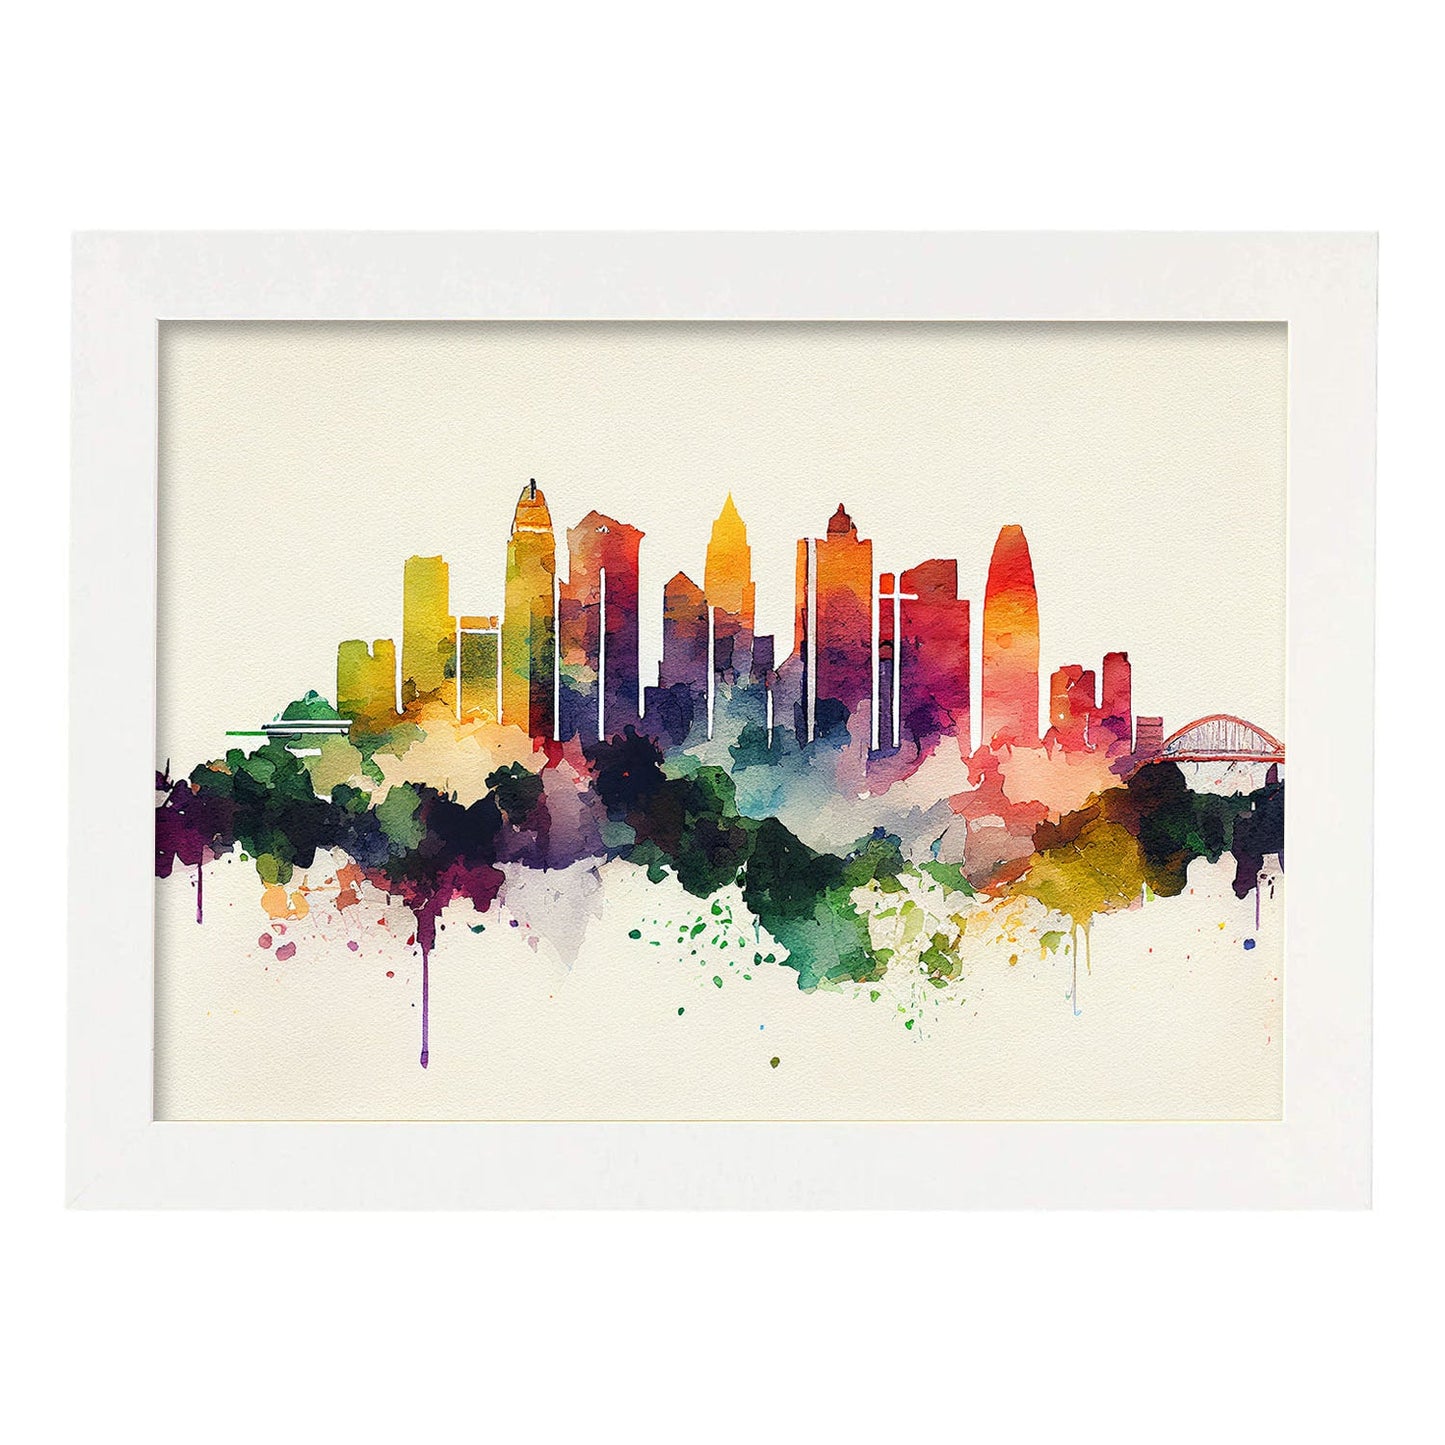 Nacnic watercolor of a skyline of the city of Singapore_4. Aesthetic Wall Art Prints for Bedroom or Living Room Design.-Artwork-Nacnic-A4-Marco Blanco-Nacnic Estudio SL